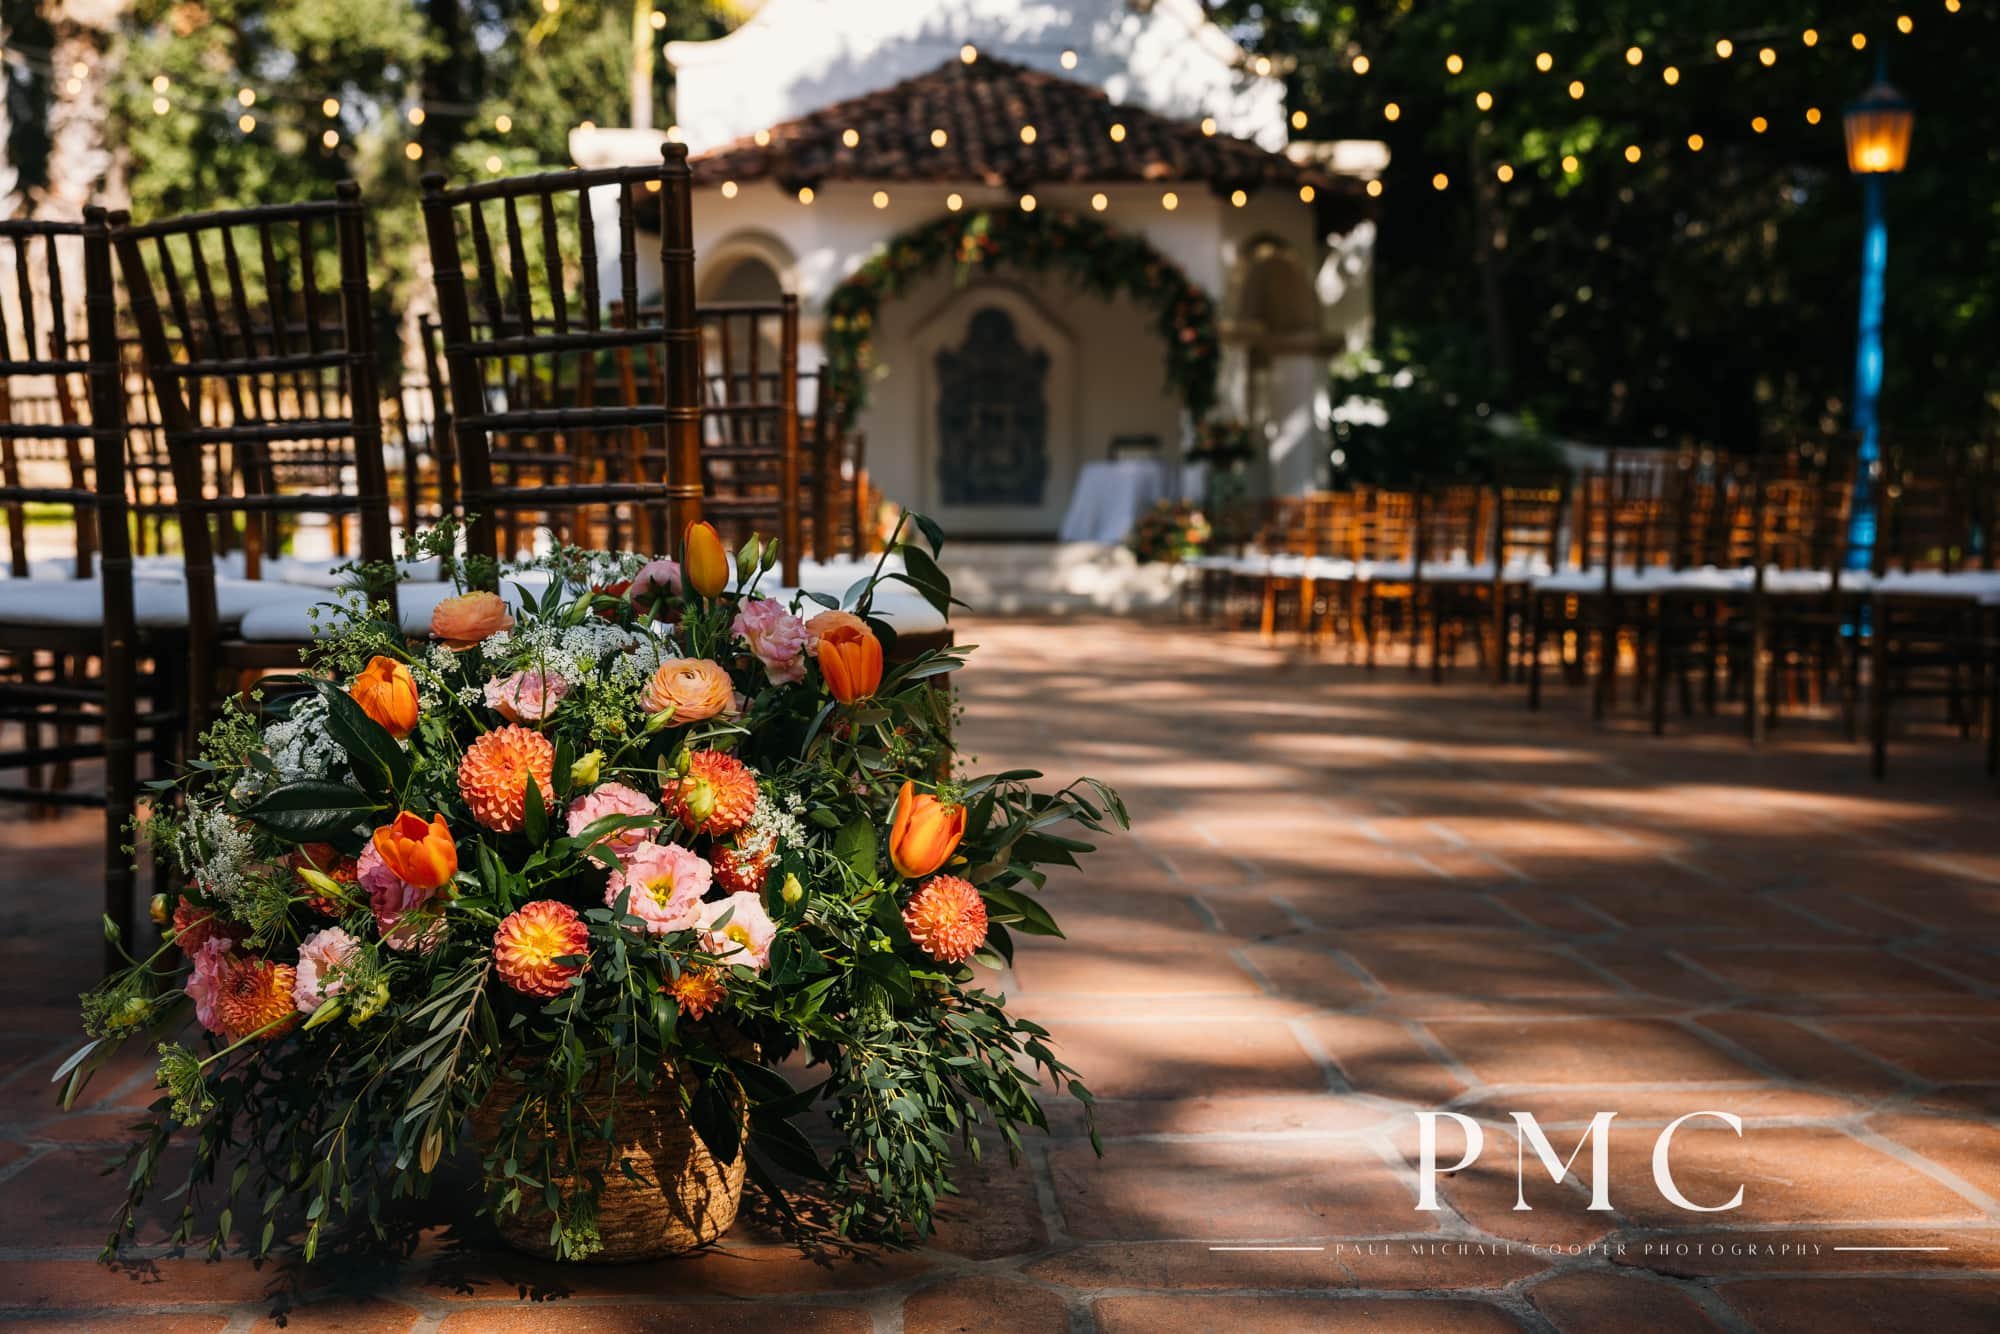 Florals and chairs set up at the ceremony site at Rancho Las Lomas wedding venue in Orange County.